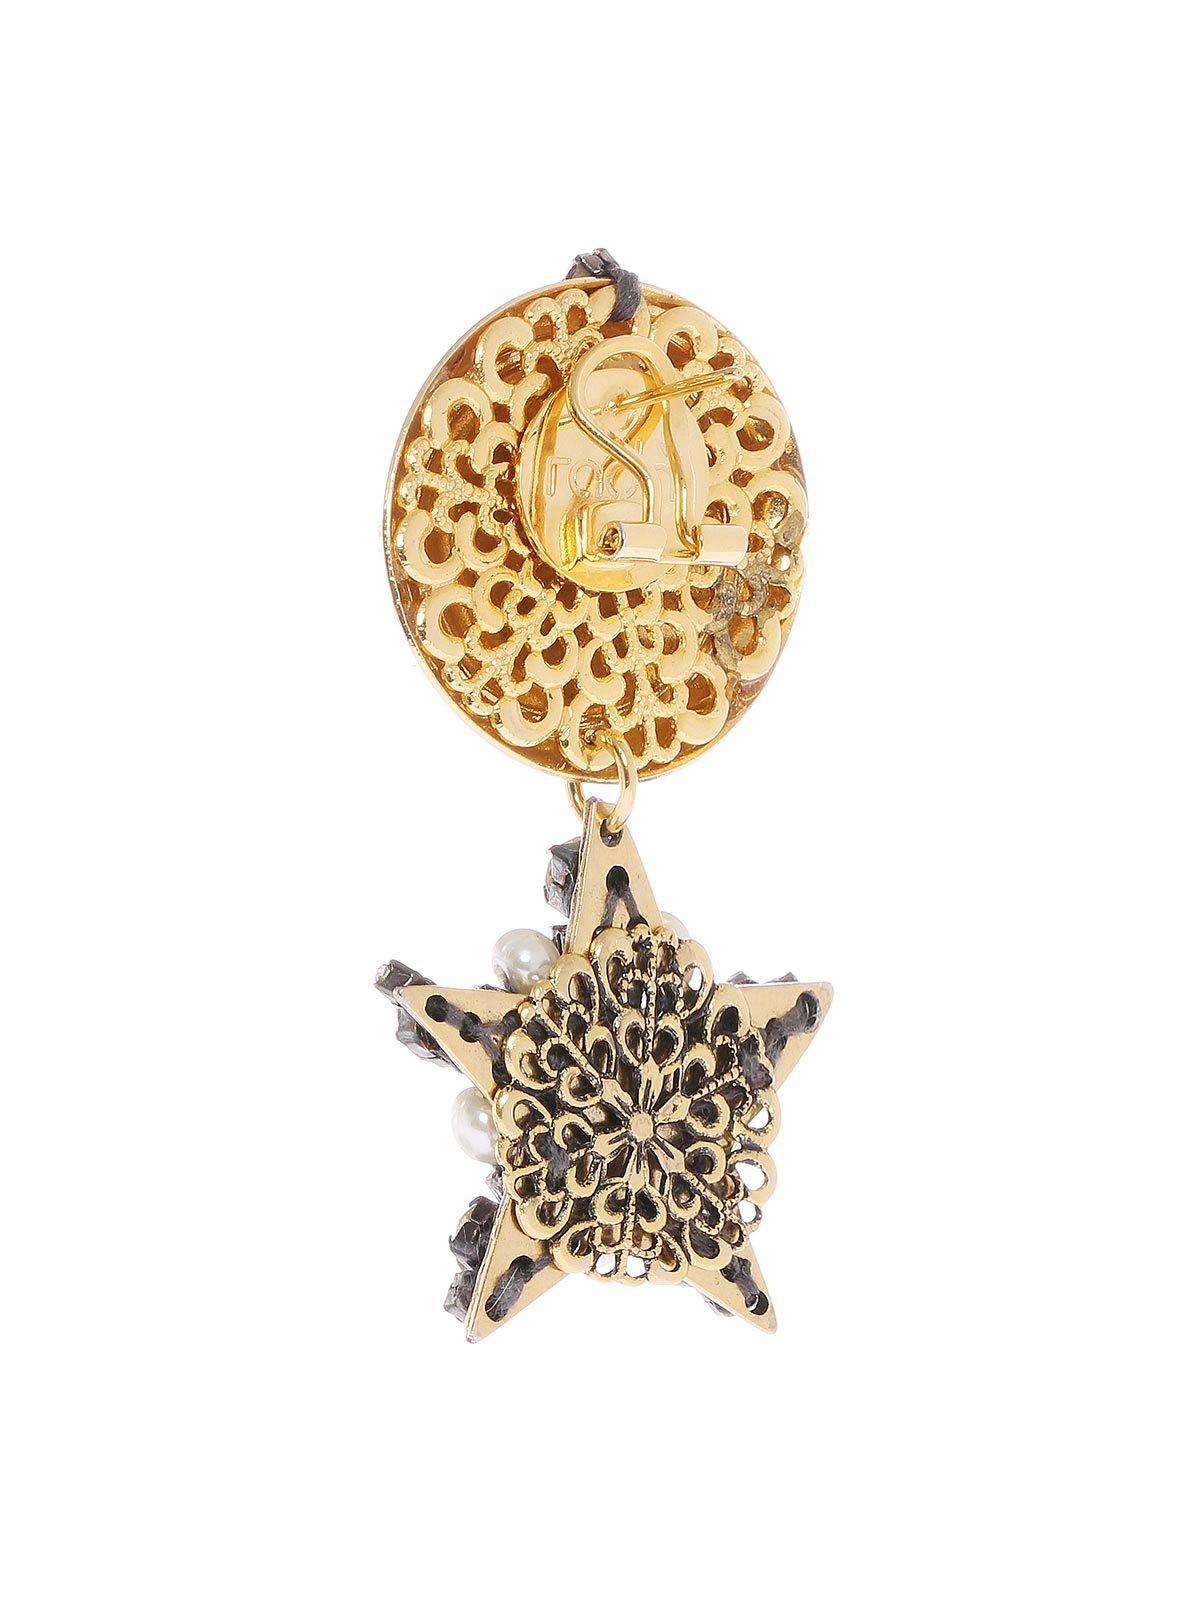 Botton earrings with pendant  star shaped